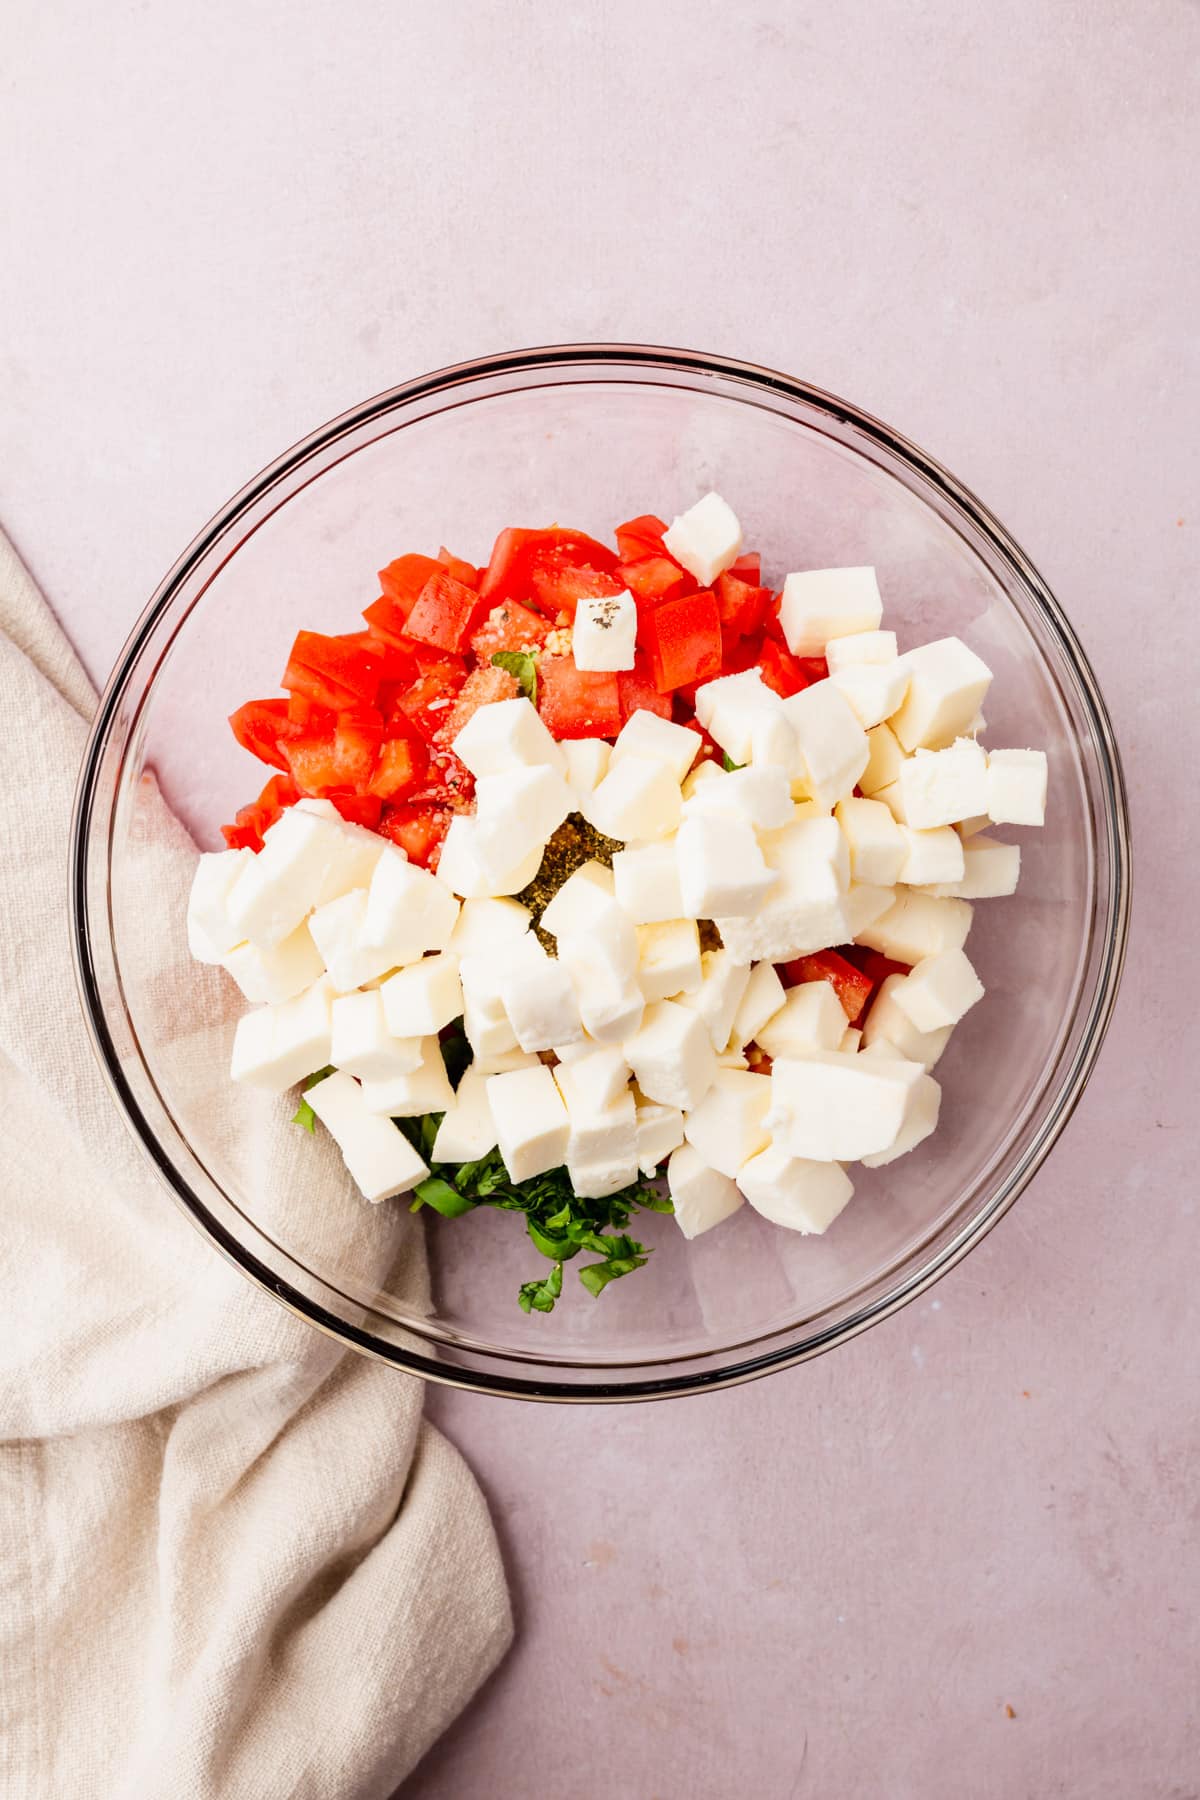 A glass mixing bowl with diced tomatoes, sliced basil, diced fresh mozzarella and minced garlic before mixing together.